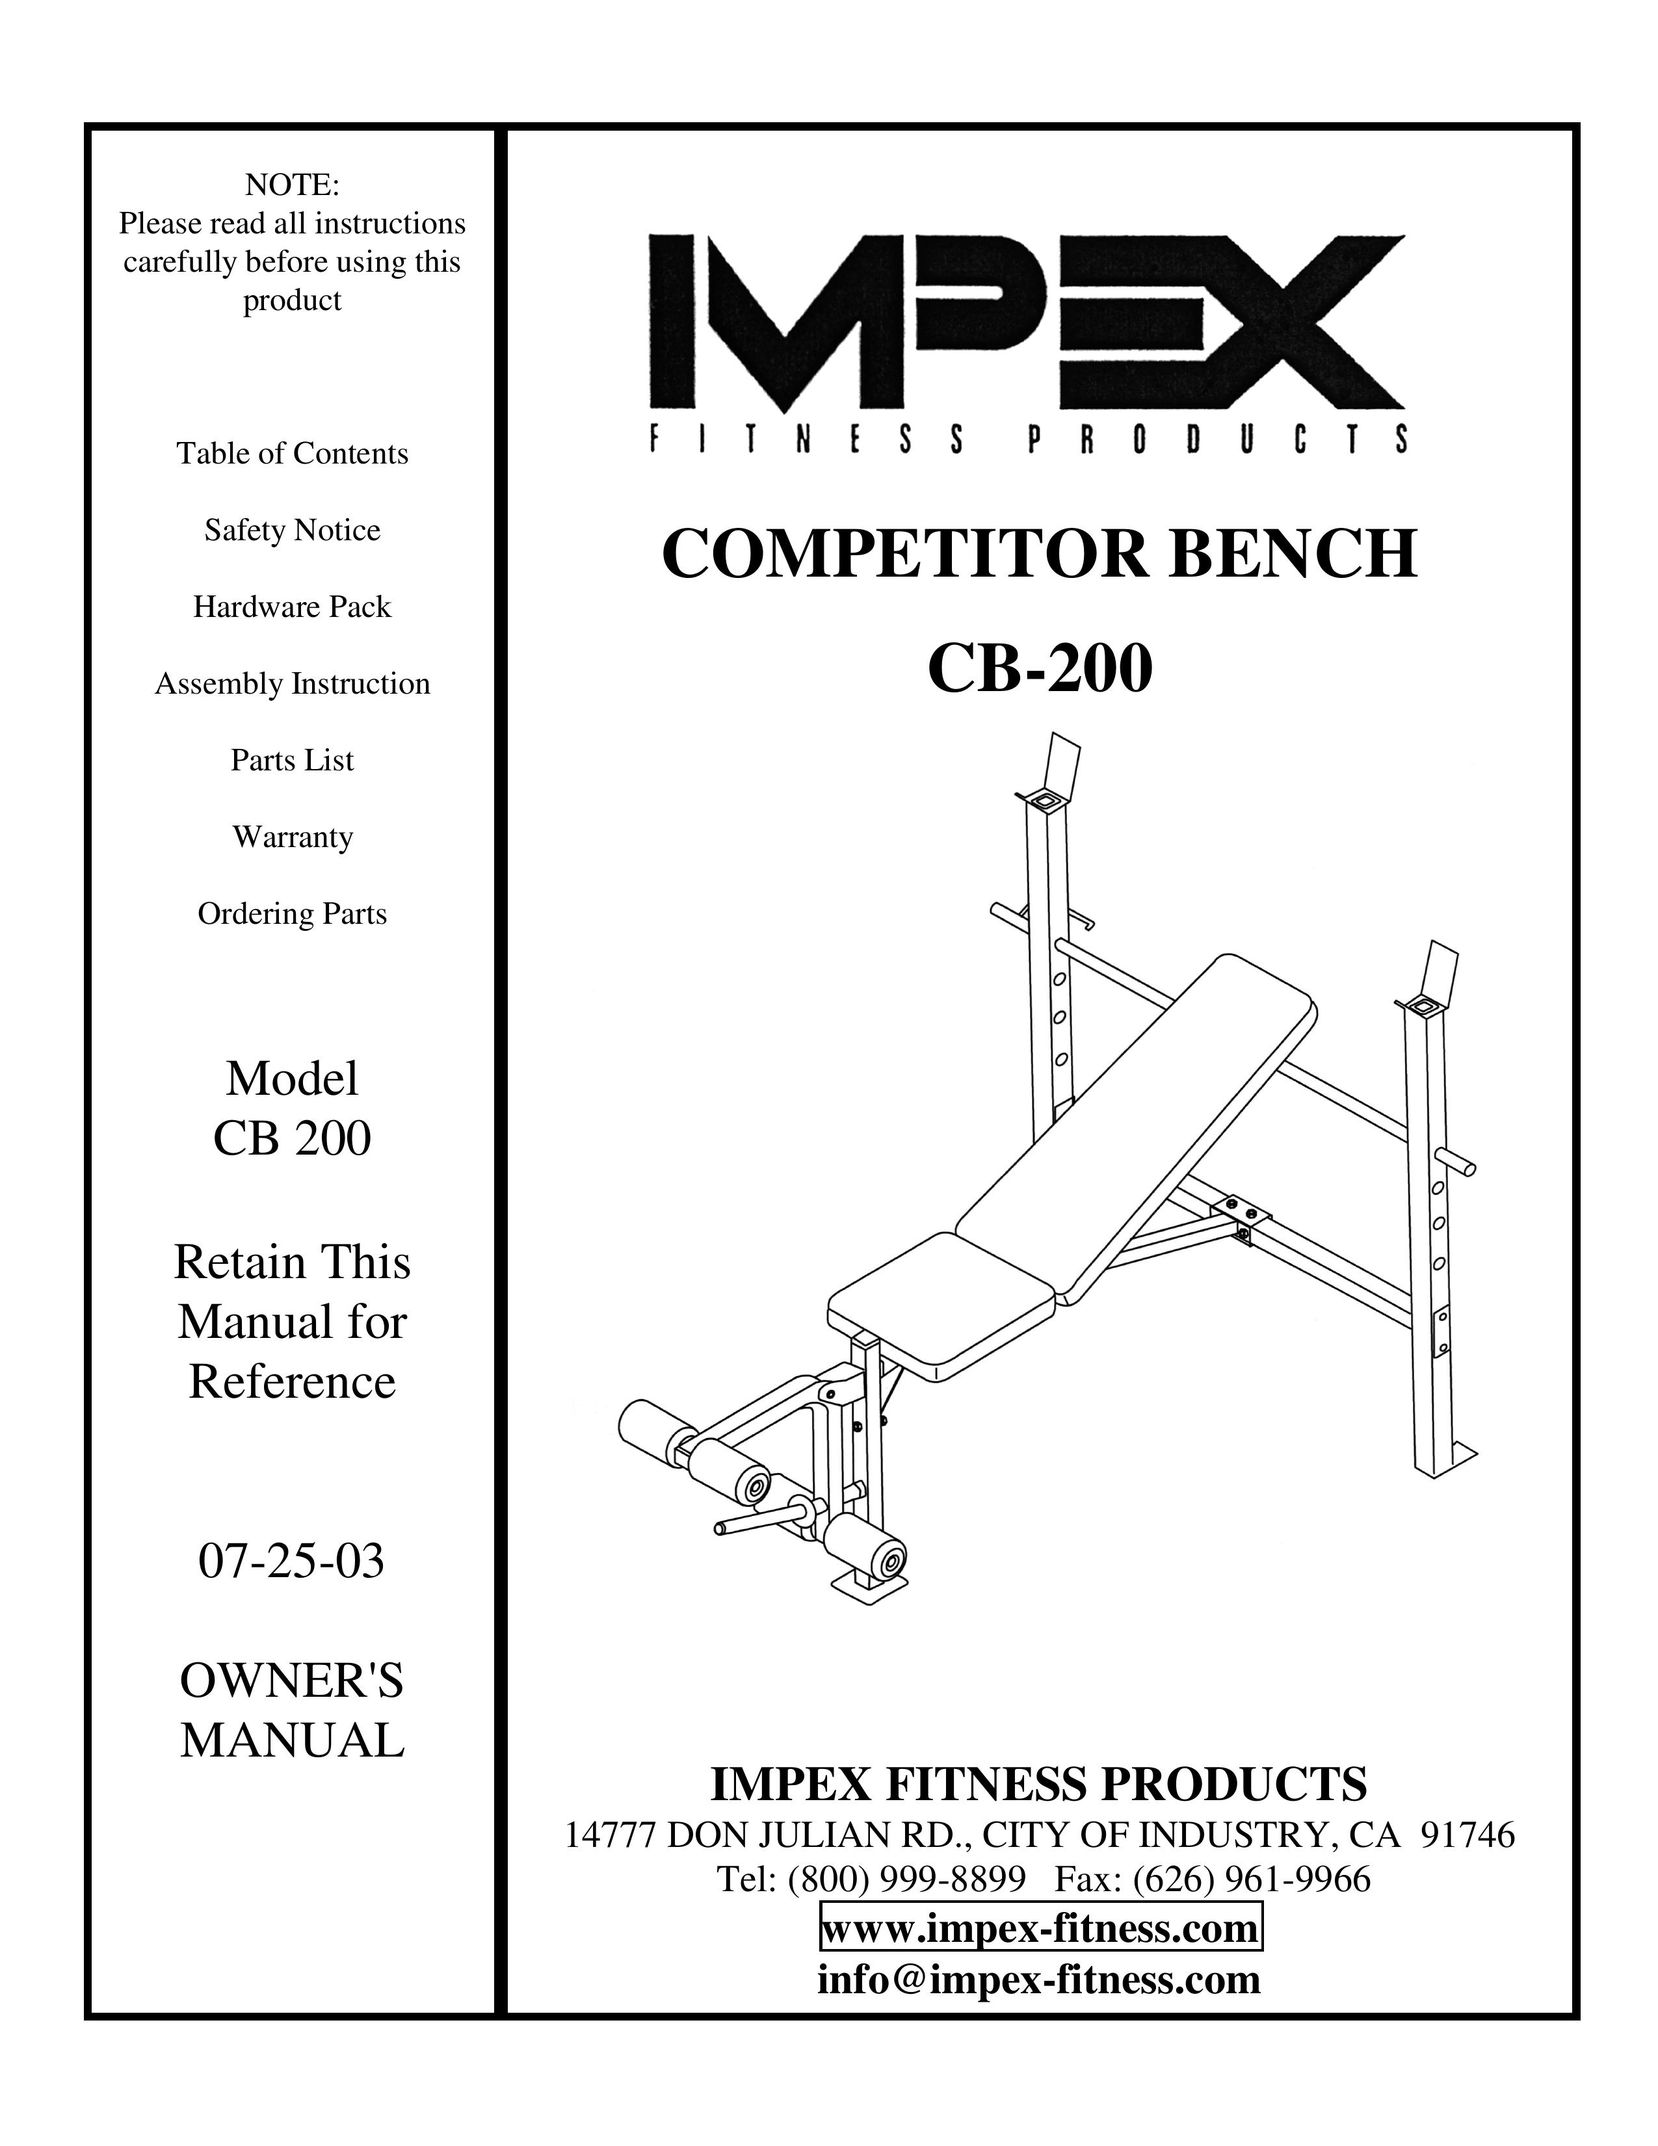 Impex CB-200 Home Gym User Manual